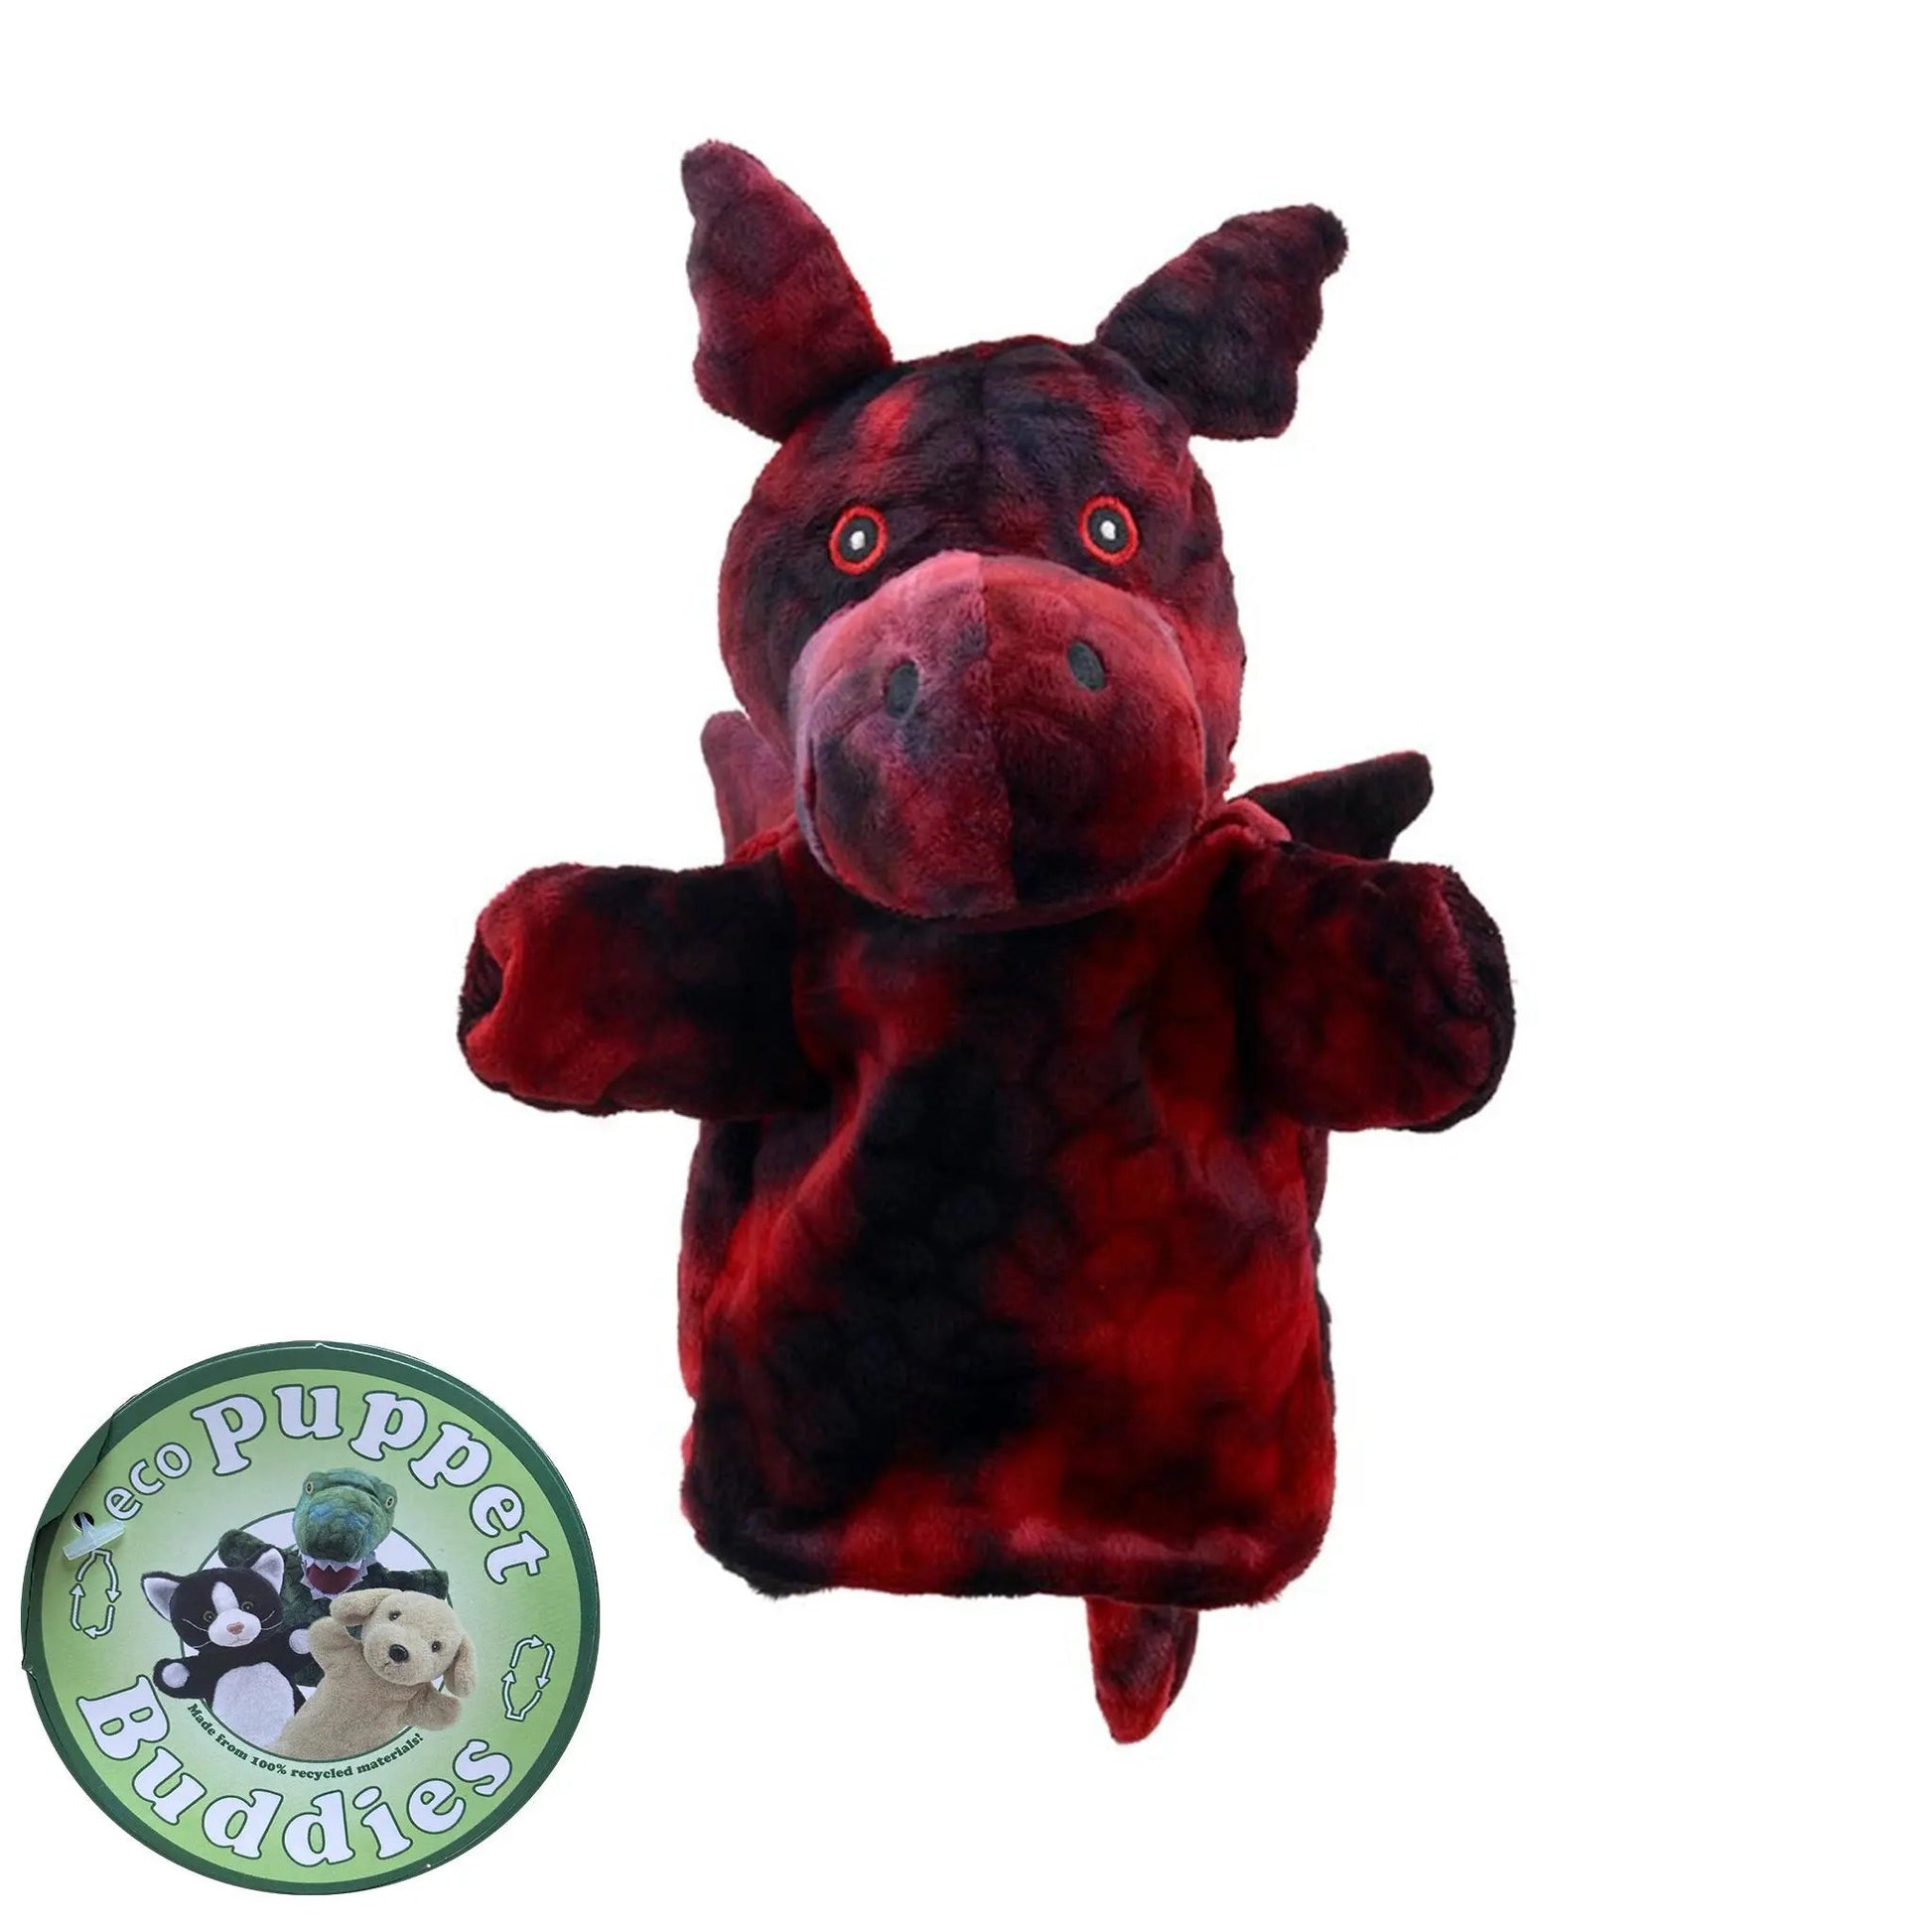 Dragon (Red) Eco Puppet Buddies Hand Puppet - The Puppet Company - The Forgotten Toy Shop